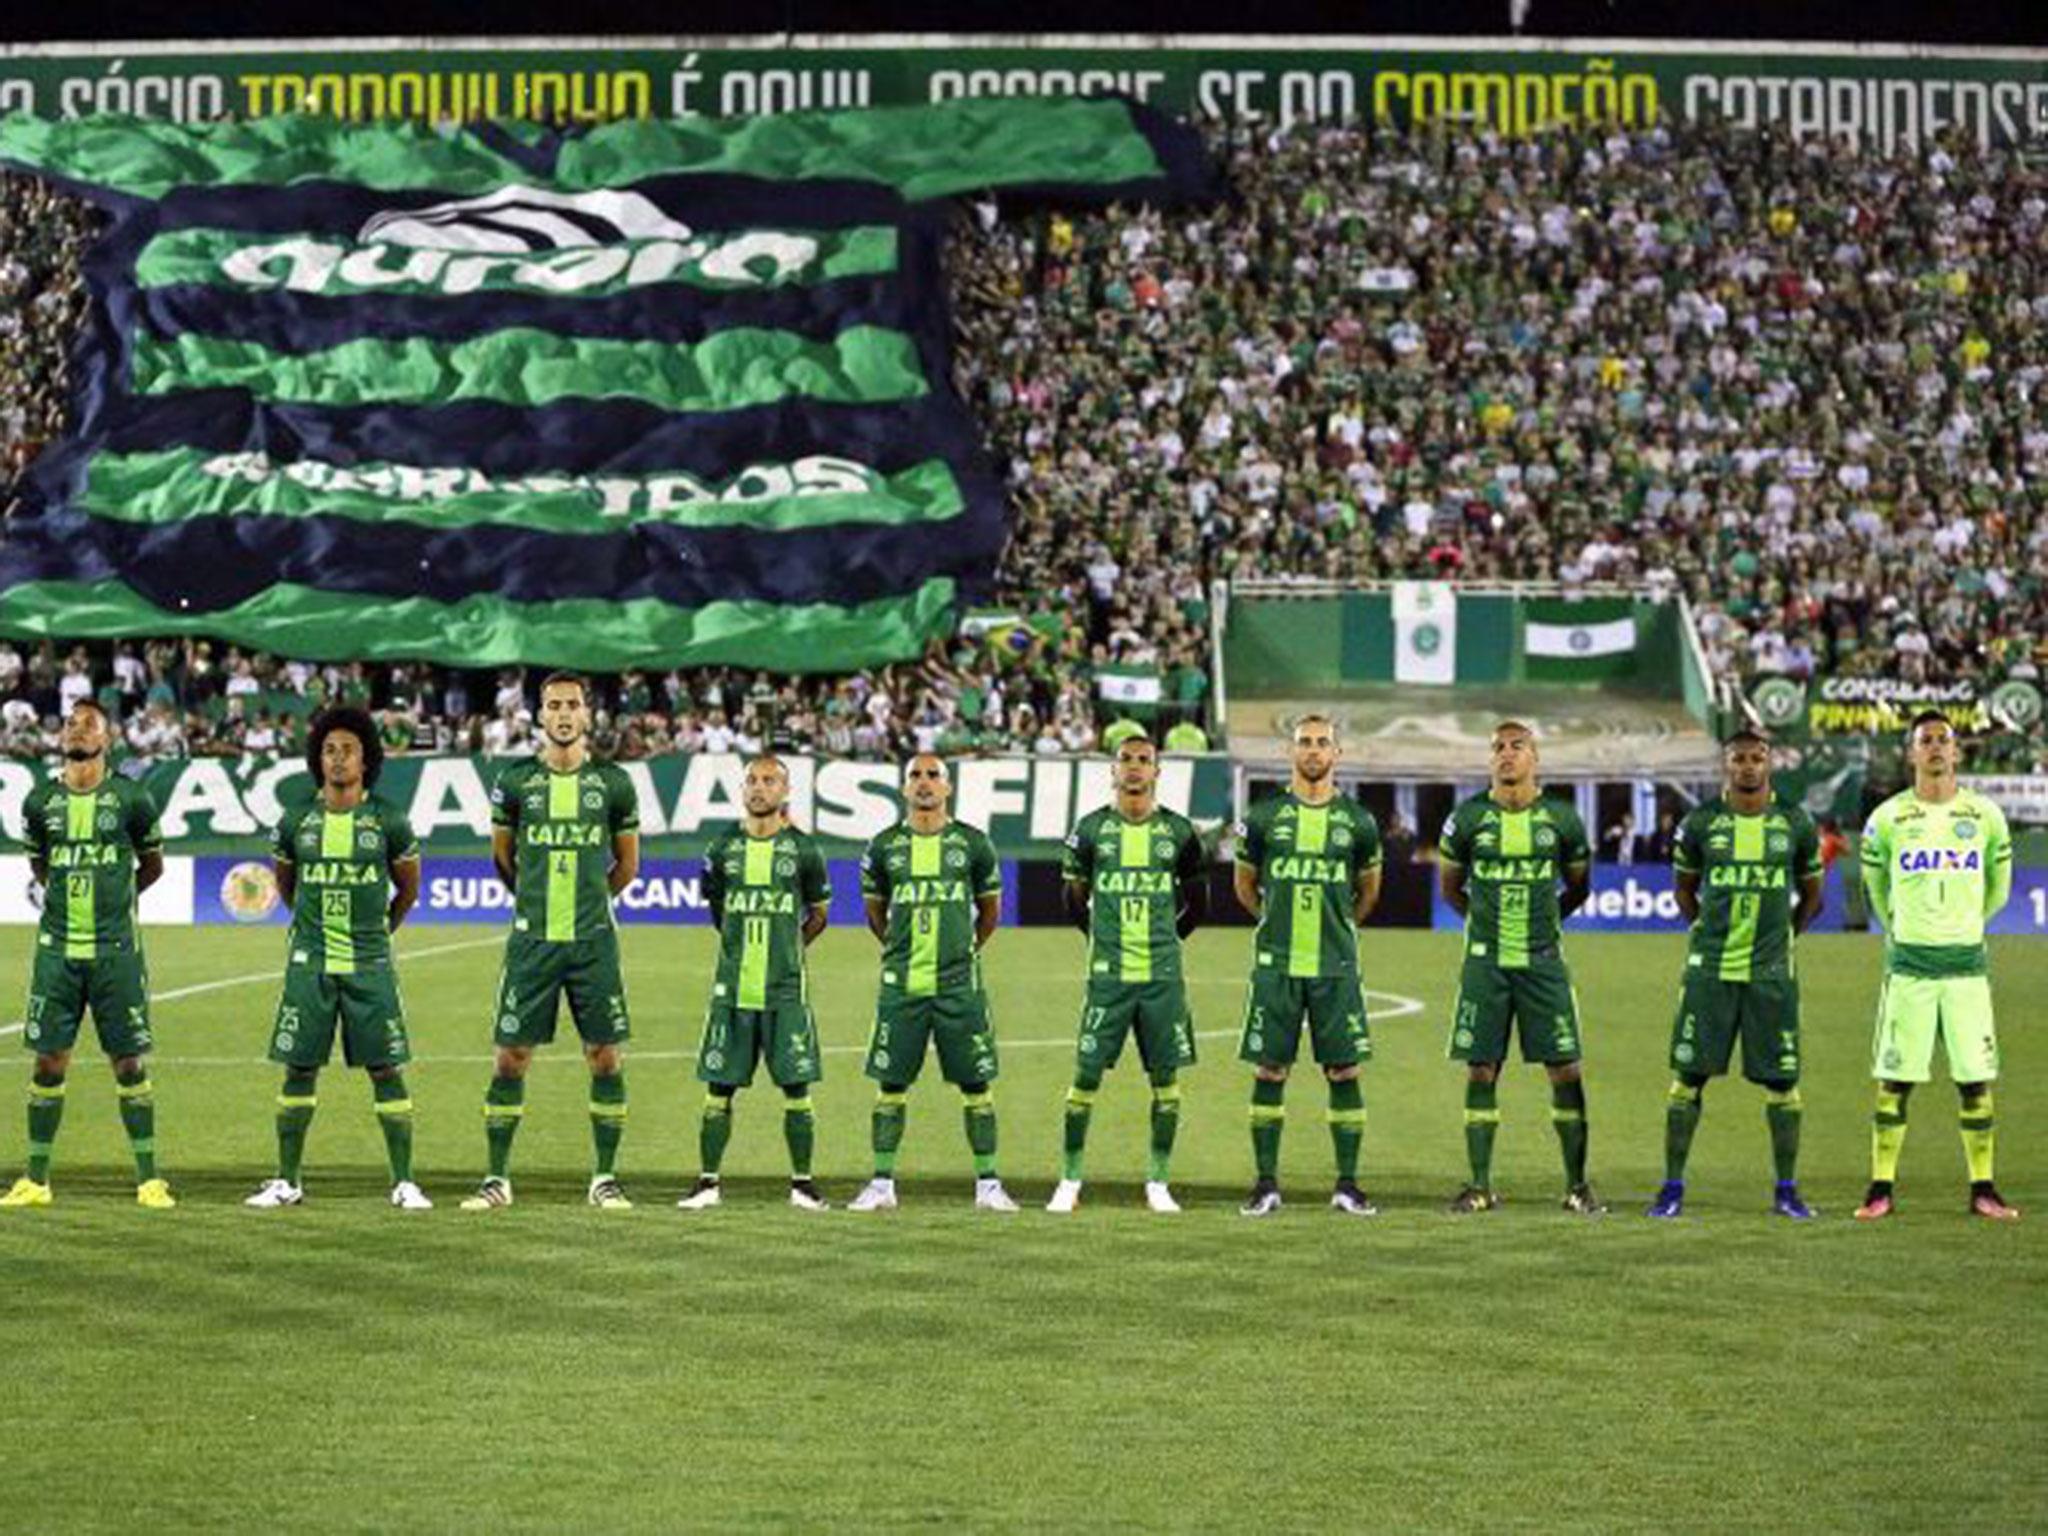 Chapecoense were due to play in the Copa Sudamericana final first leg the day after their tragic plane crash